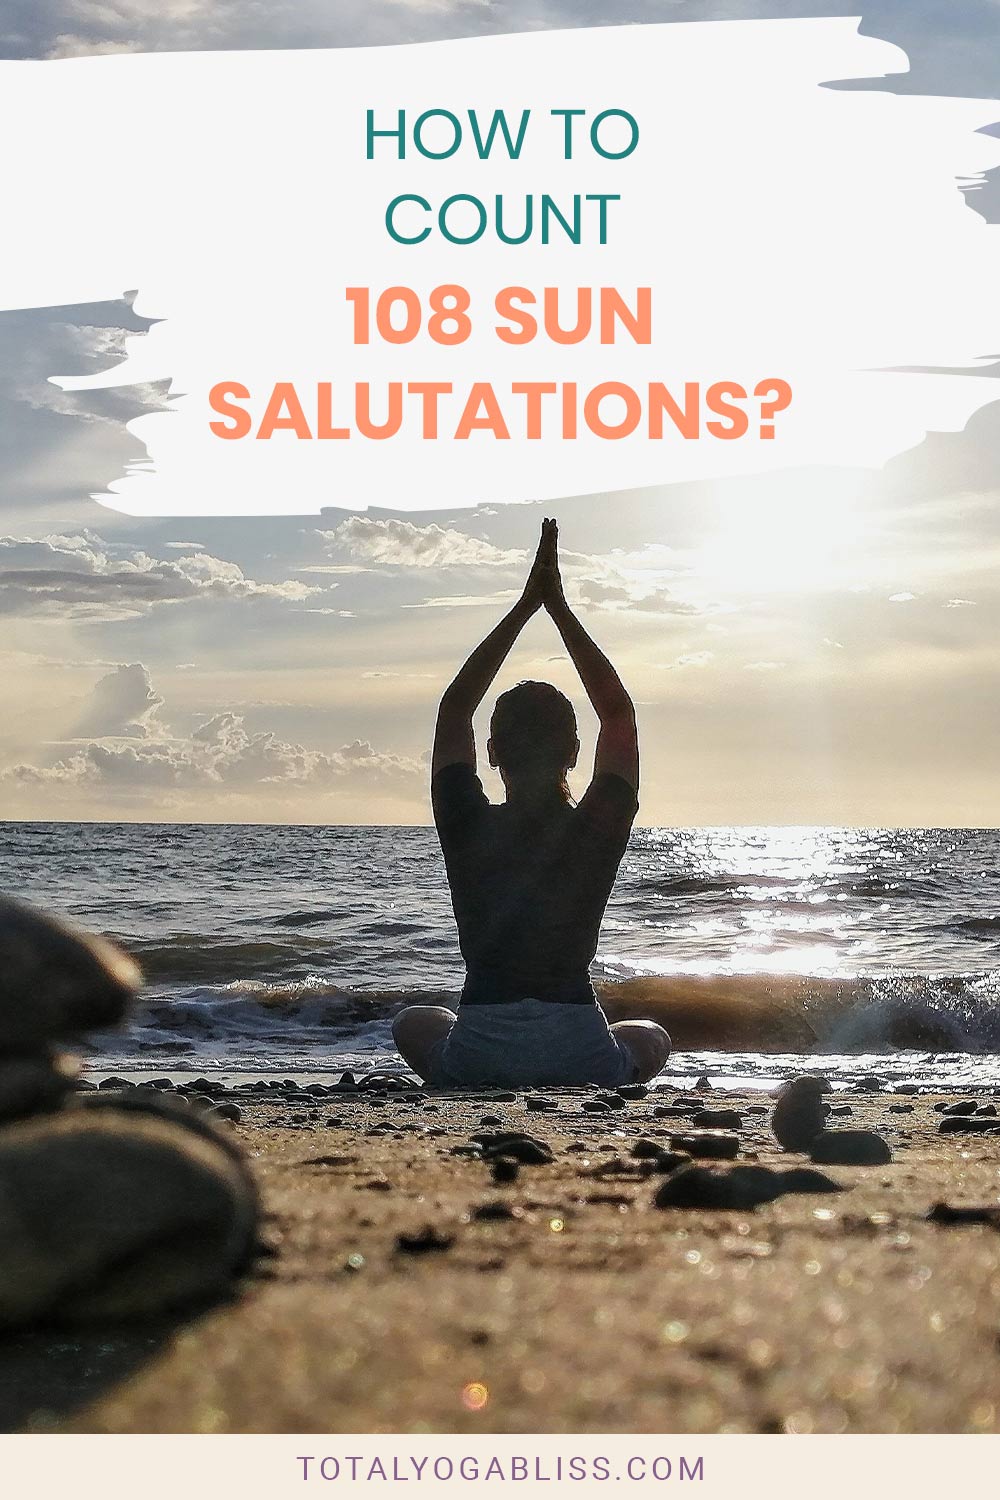 How to Count 108 Sun Salutations?